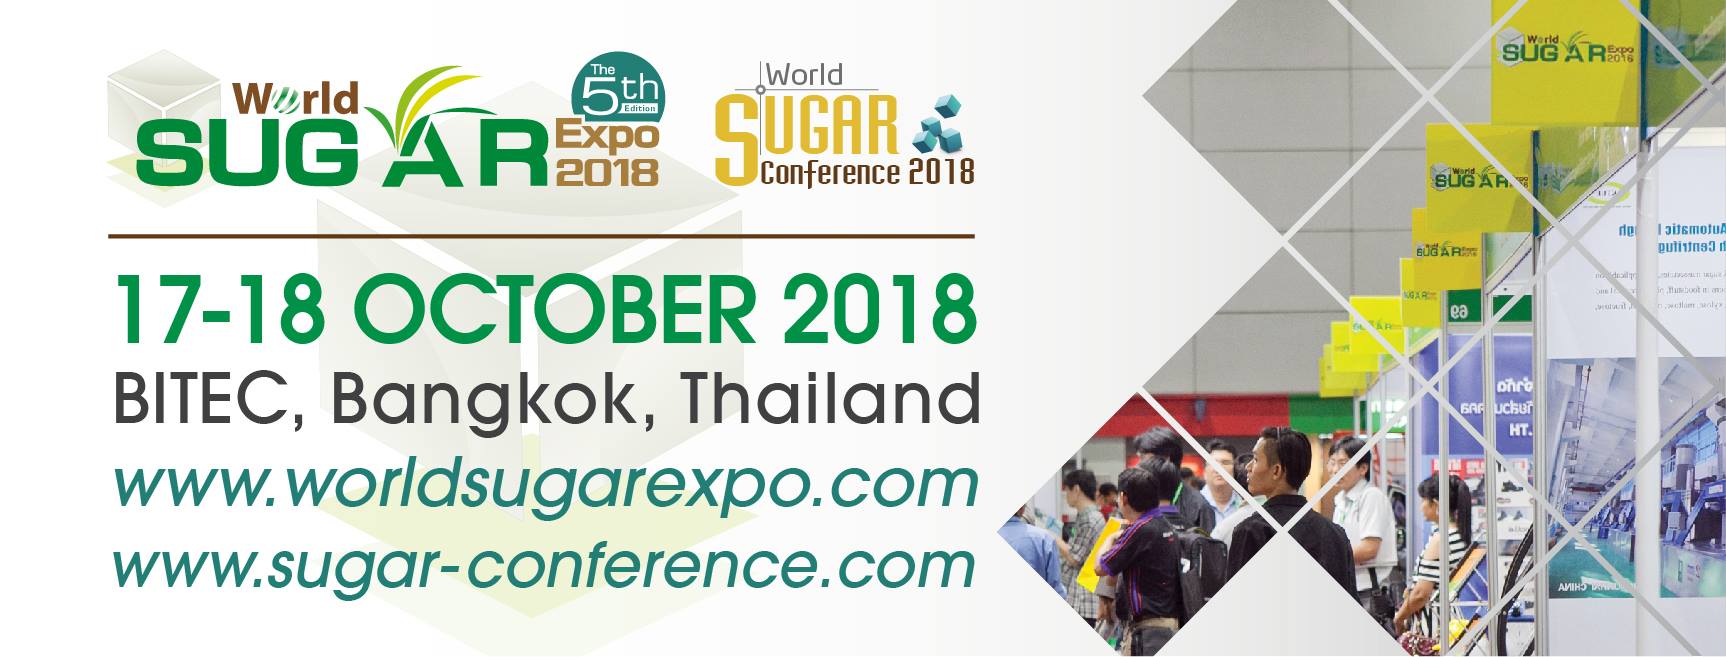 World Sugar Expo & Conference 2018 : 17-19 October 2018